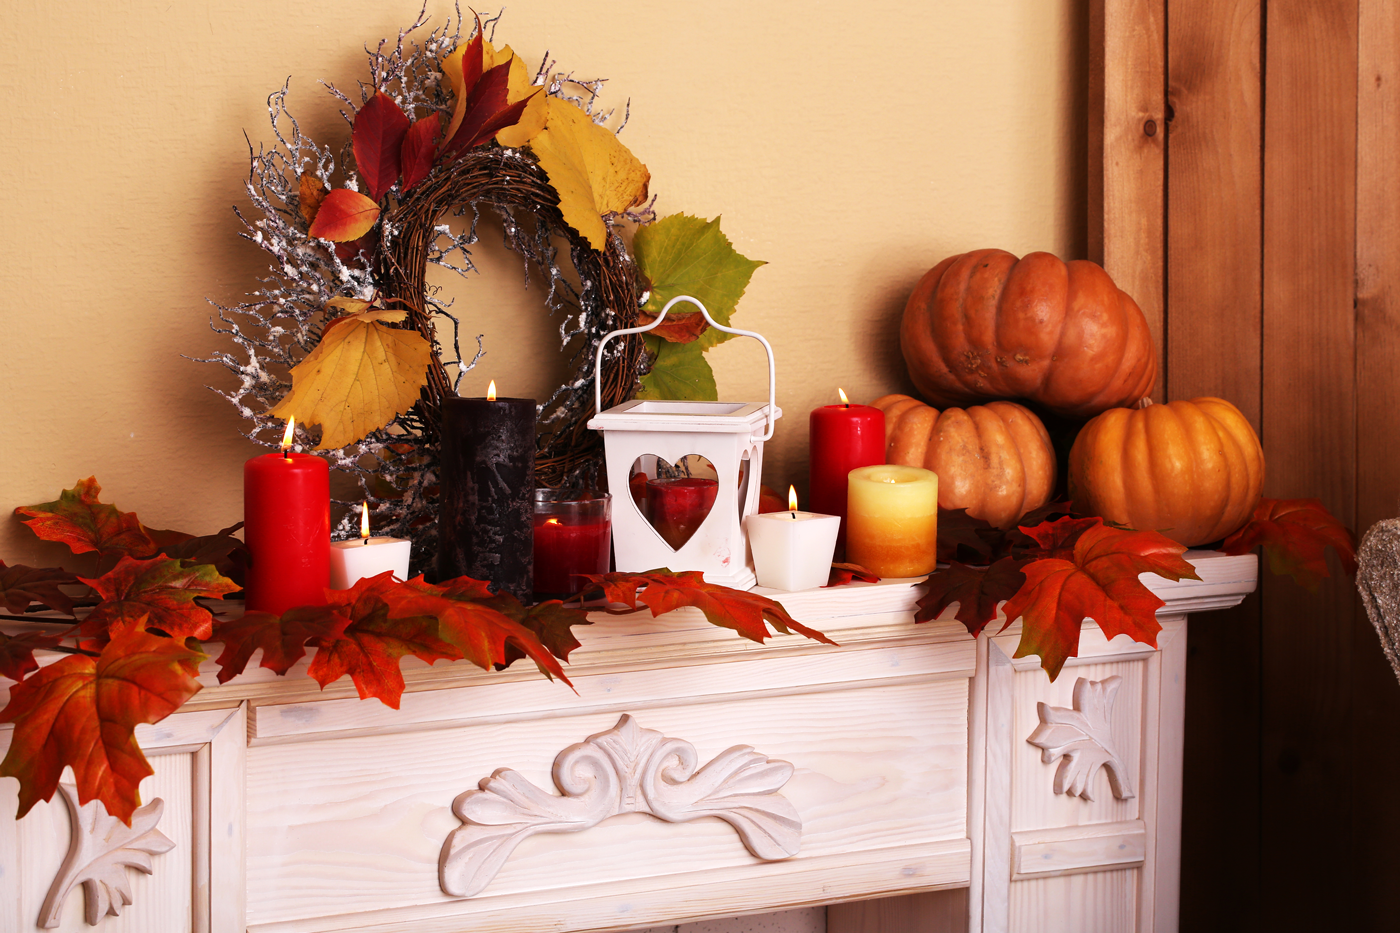 bhgrelife.com - Cozy and Colorful Home Decorations for Fall